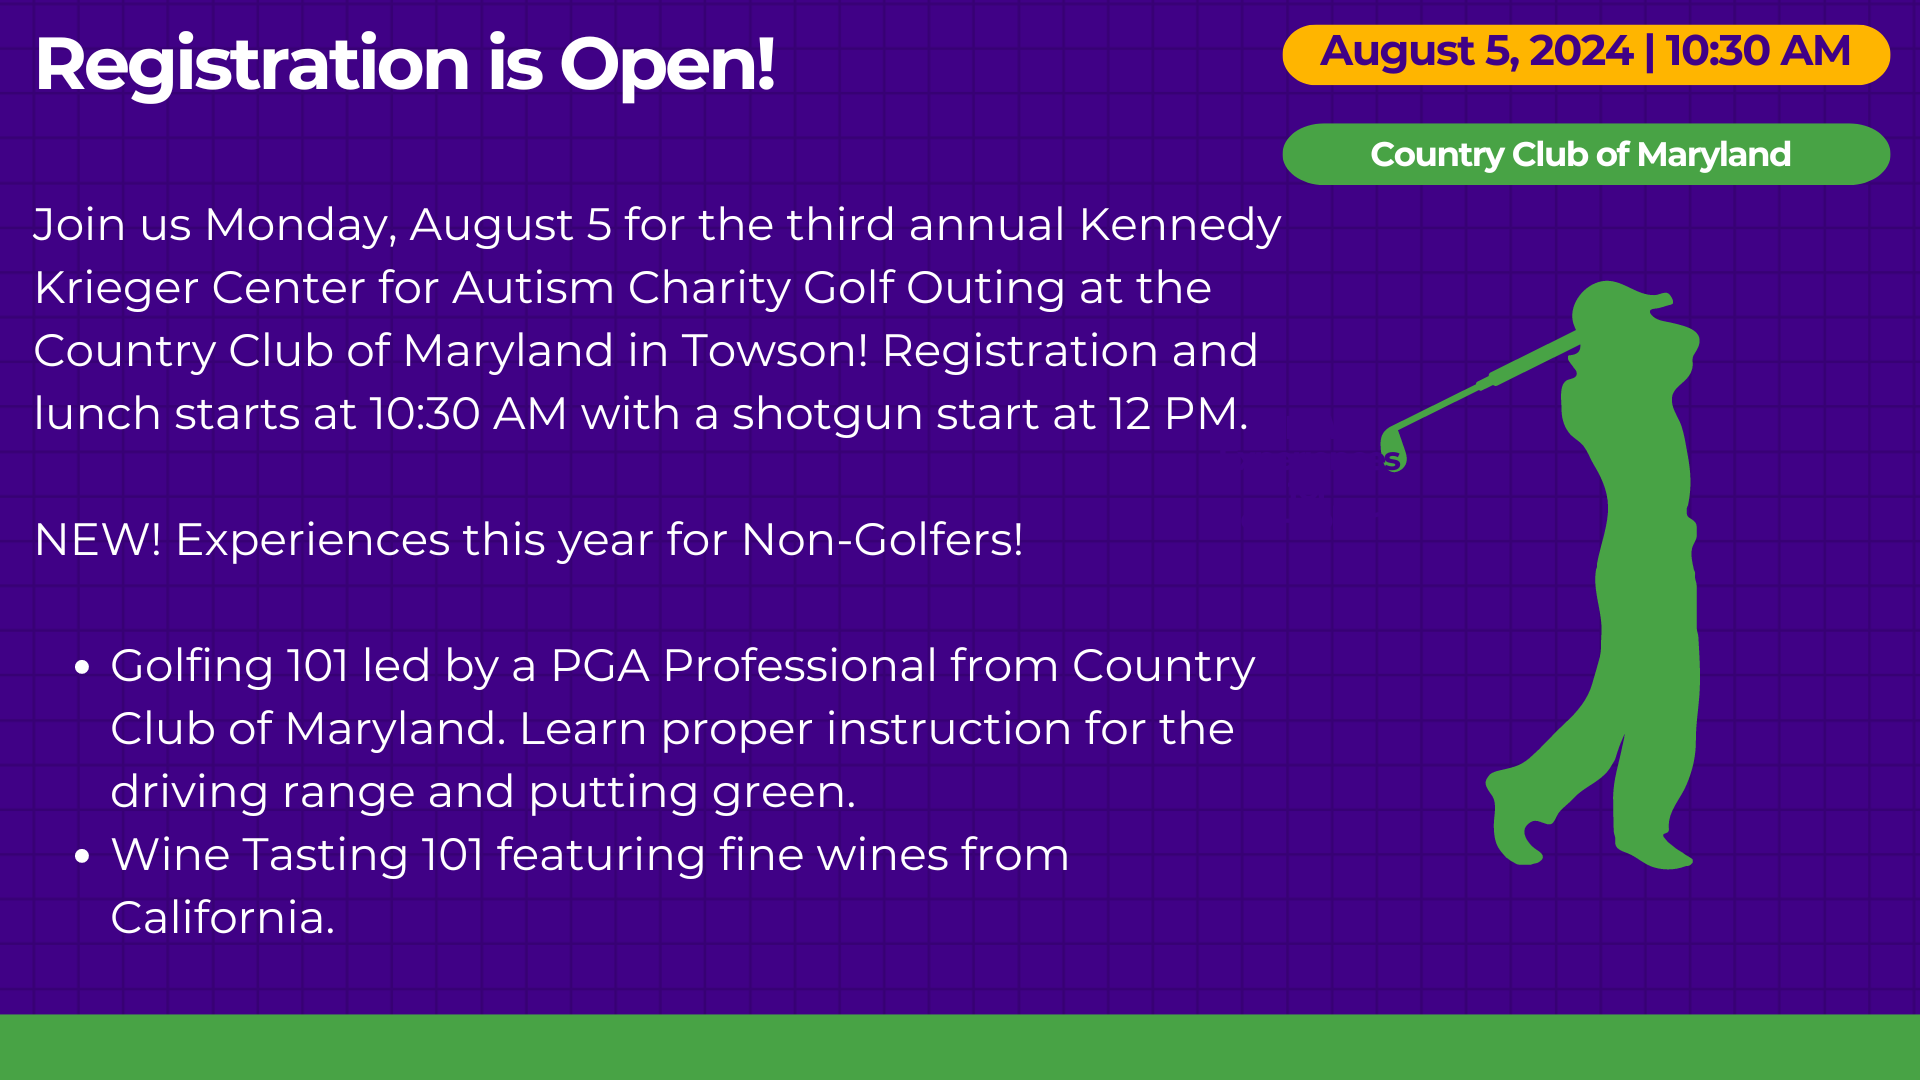 Registration is Open! Join us Monday, August 5 for the third annual Kennedy Krieger Center for Autism Charity Golf Outing at the Country Club of Maryland in Towson! Registration and lunch starts at 10:30 AM with a shotgun start at 12 PM.  NEW! Experiences this year for Non-Golfers!  Golfing 101 led by a PGA Professional from Country Club of Maryland. Learn proper instruction for the driving range and putting green. Wine Tasting 101 featuring fine wines from California.